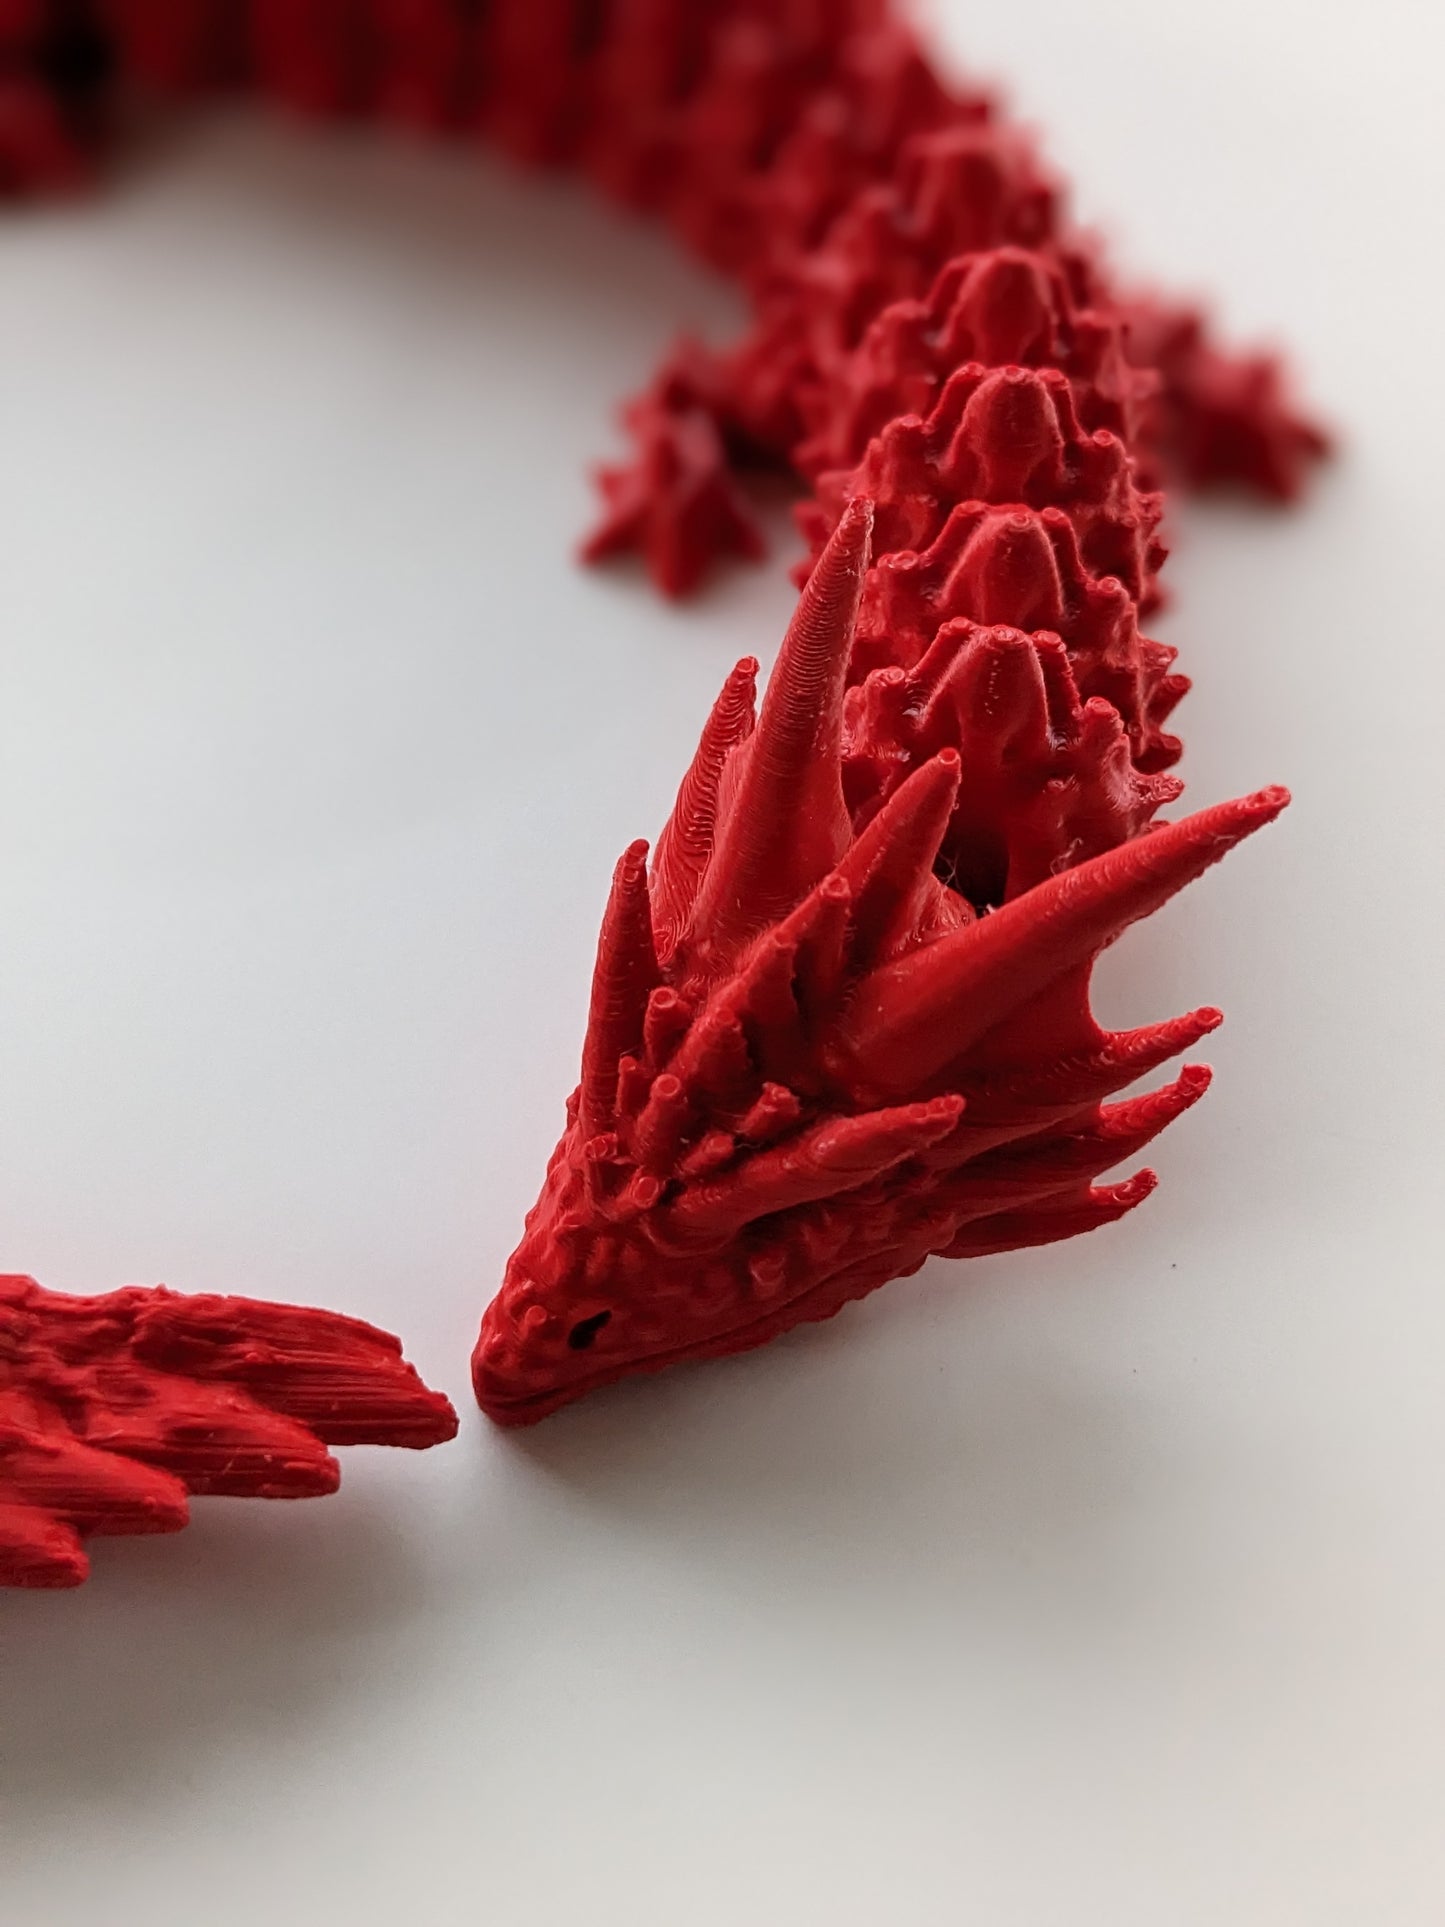 Articulated 3D Printed Familiars